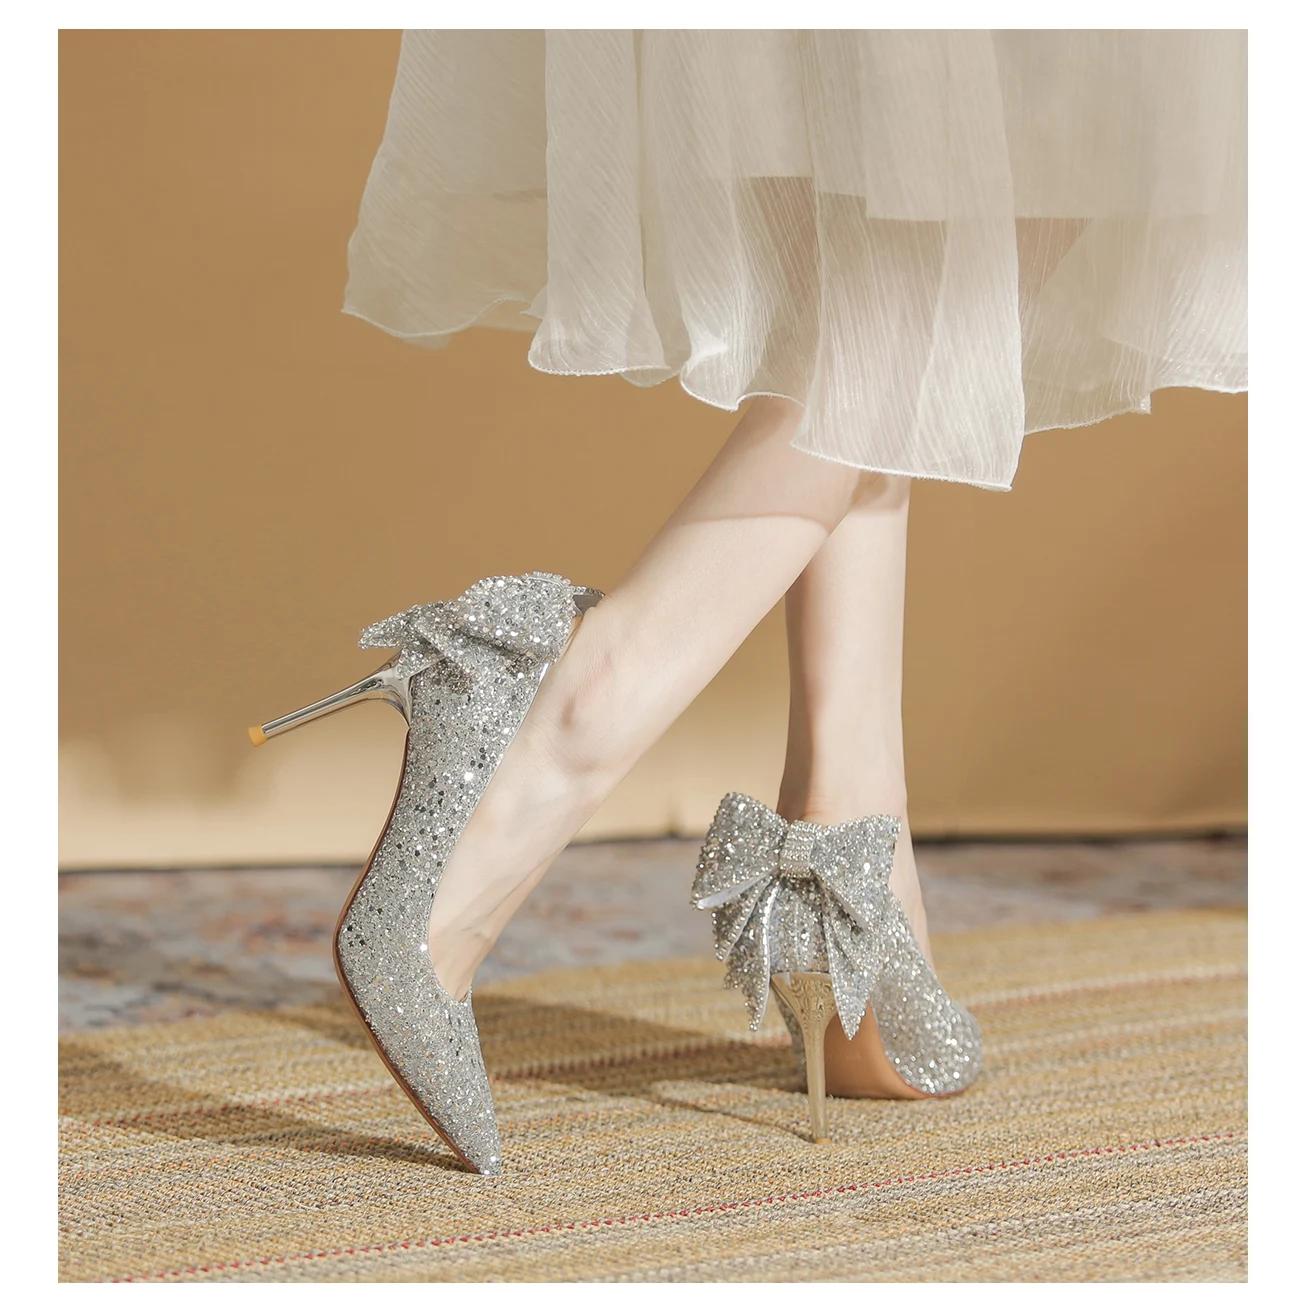 Sparkly Bridal Shoes | Butterfly Heels